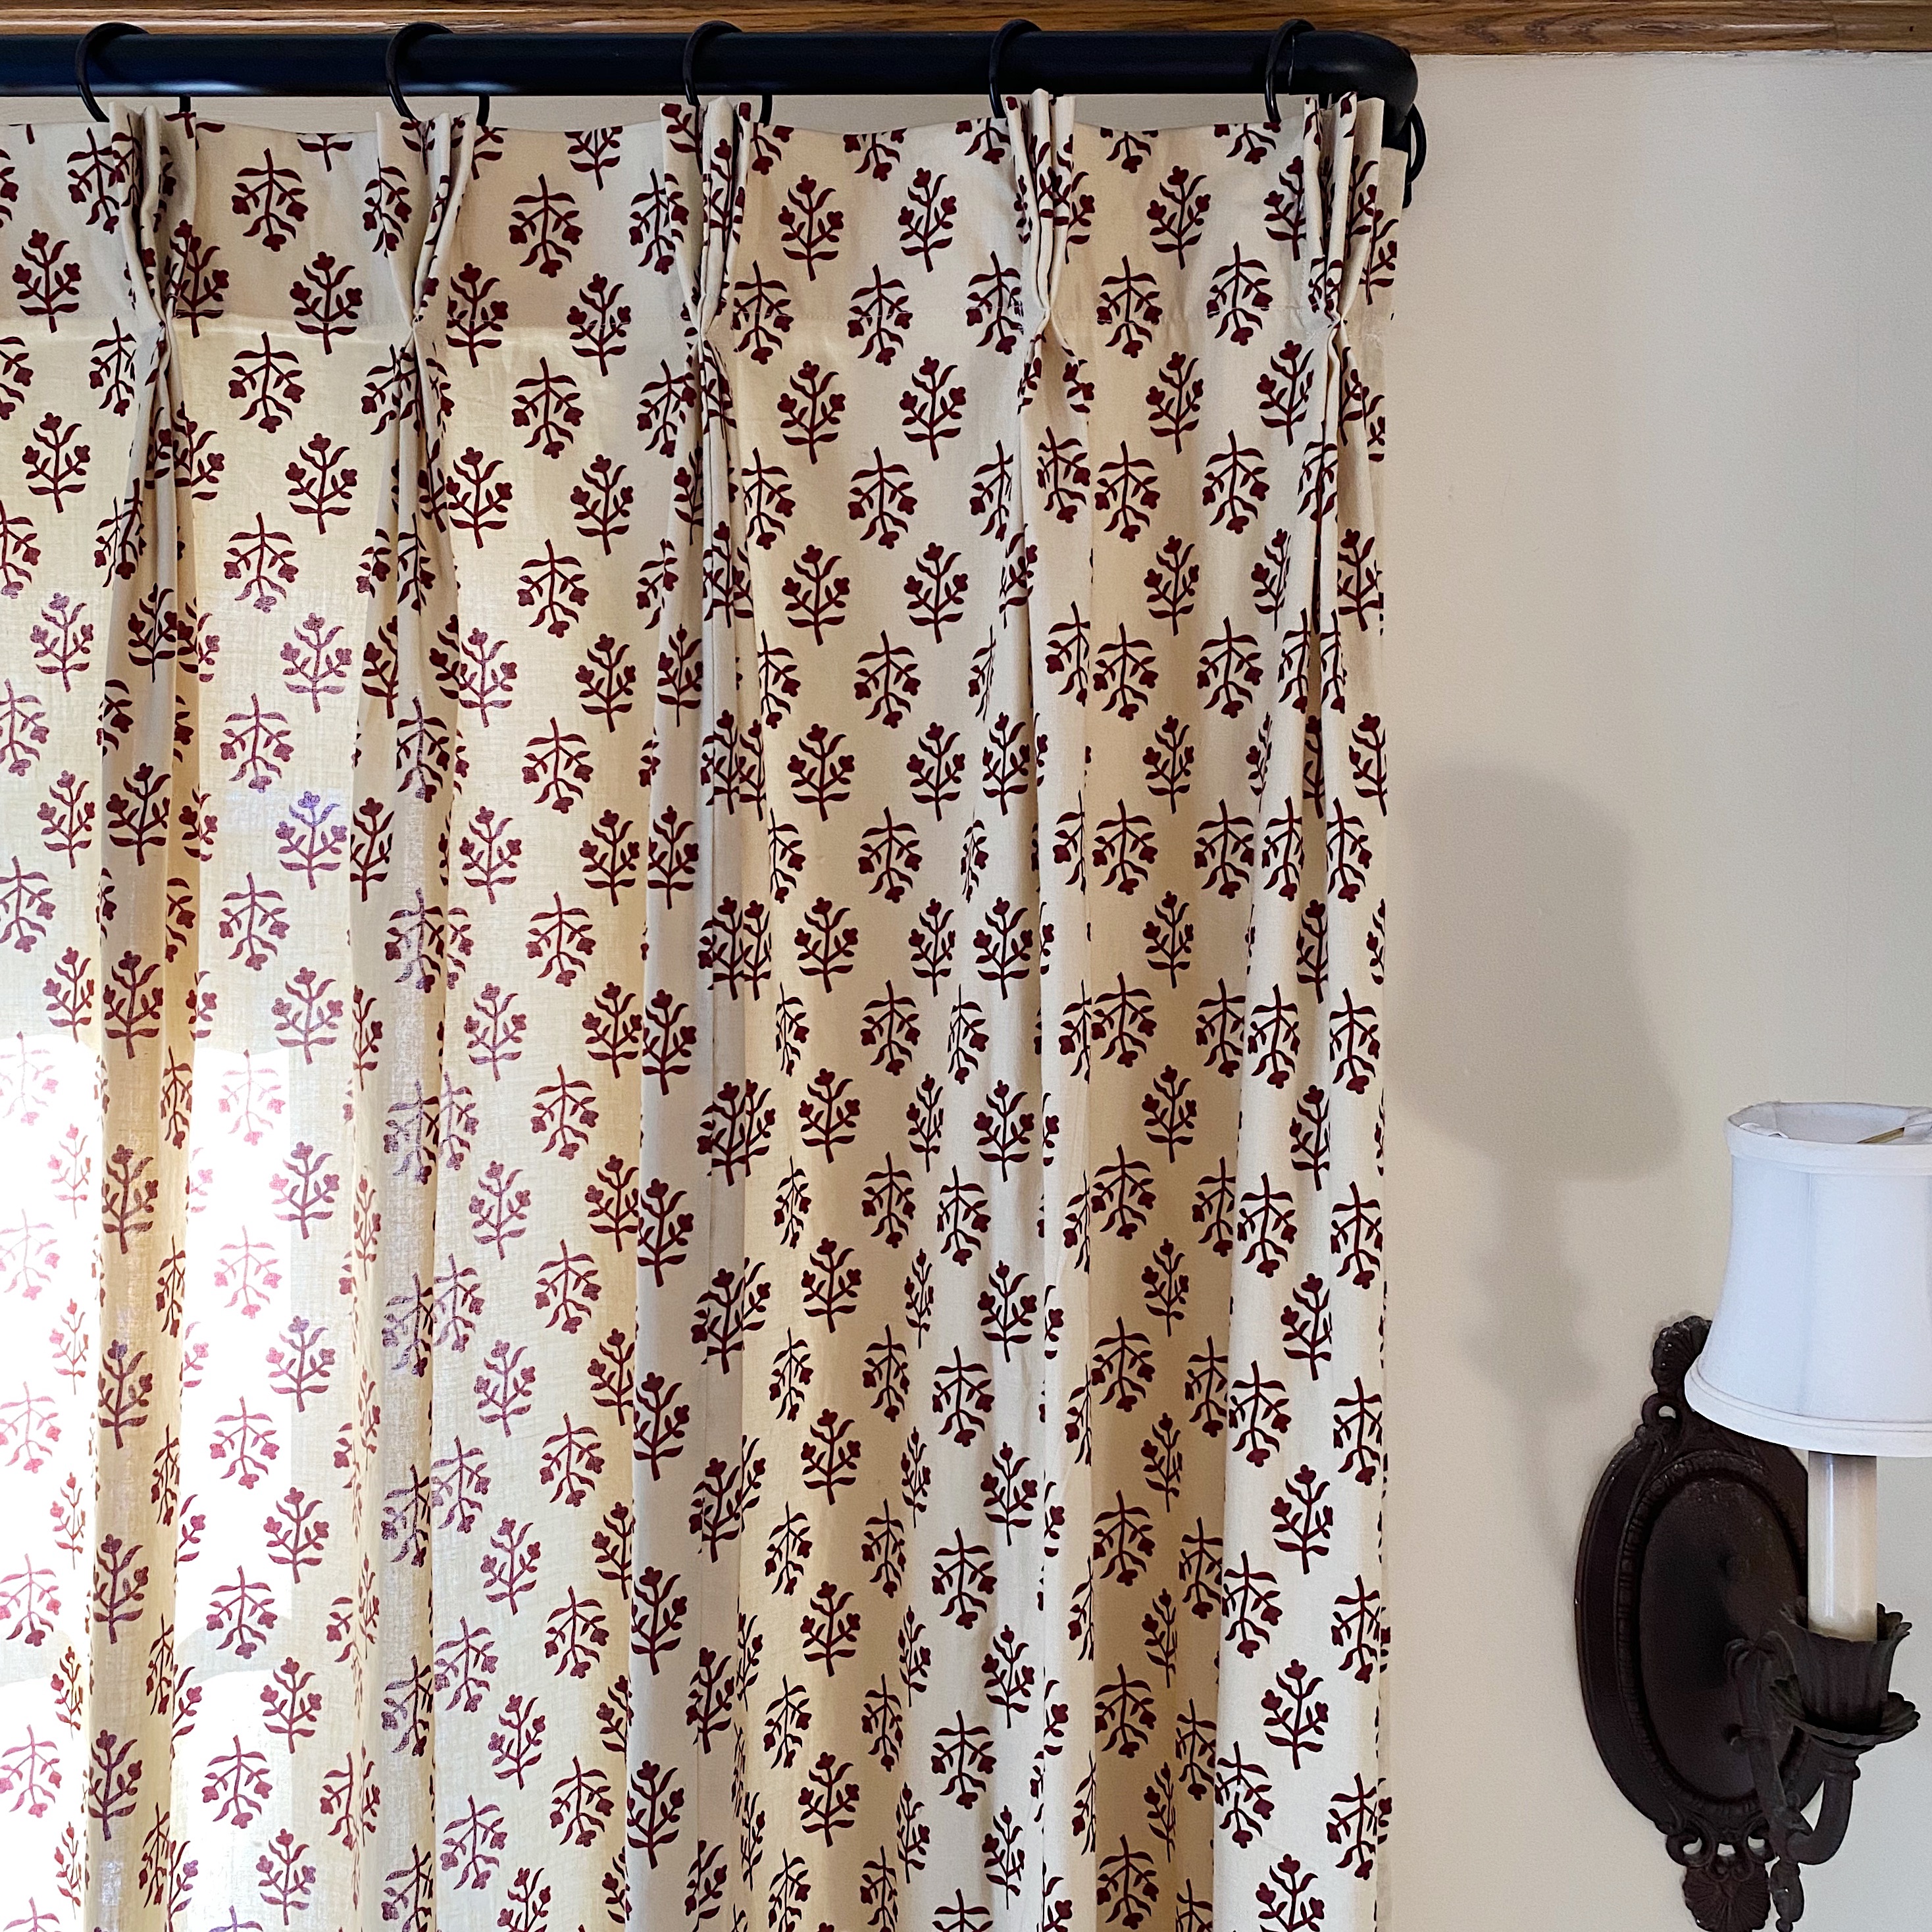 How to Add a Pinch Pleat on Store Bought Curtains